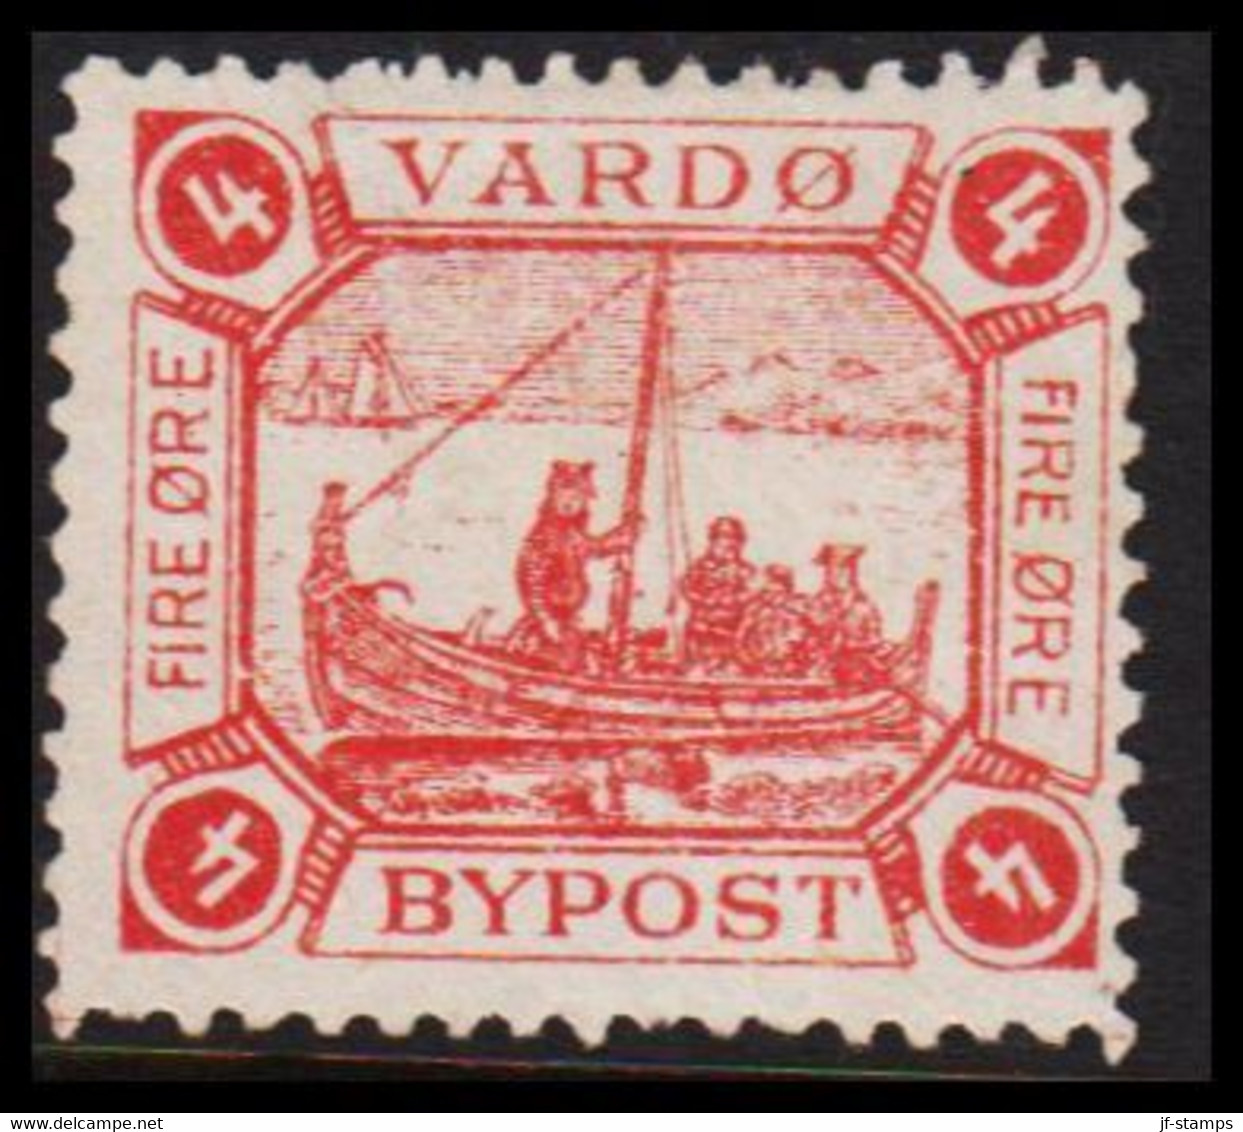 1888. NORGE. VARDØ BYPOST FIRE ØRE. No Gum. Small Fold. - JF529836 - Emisiones Locales